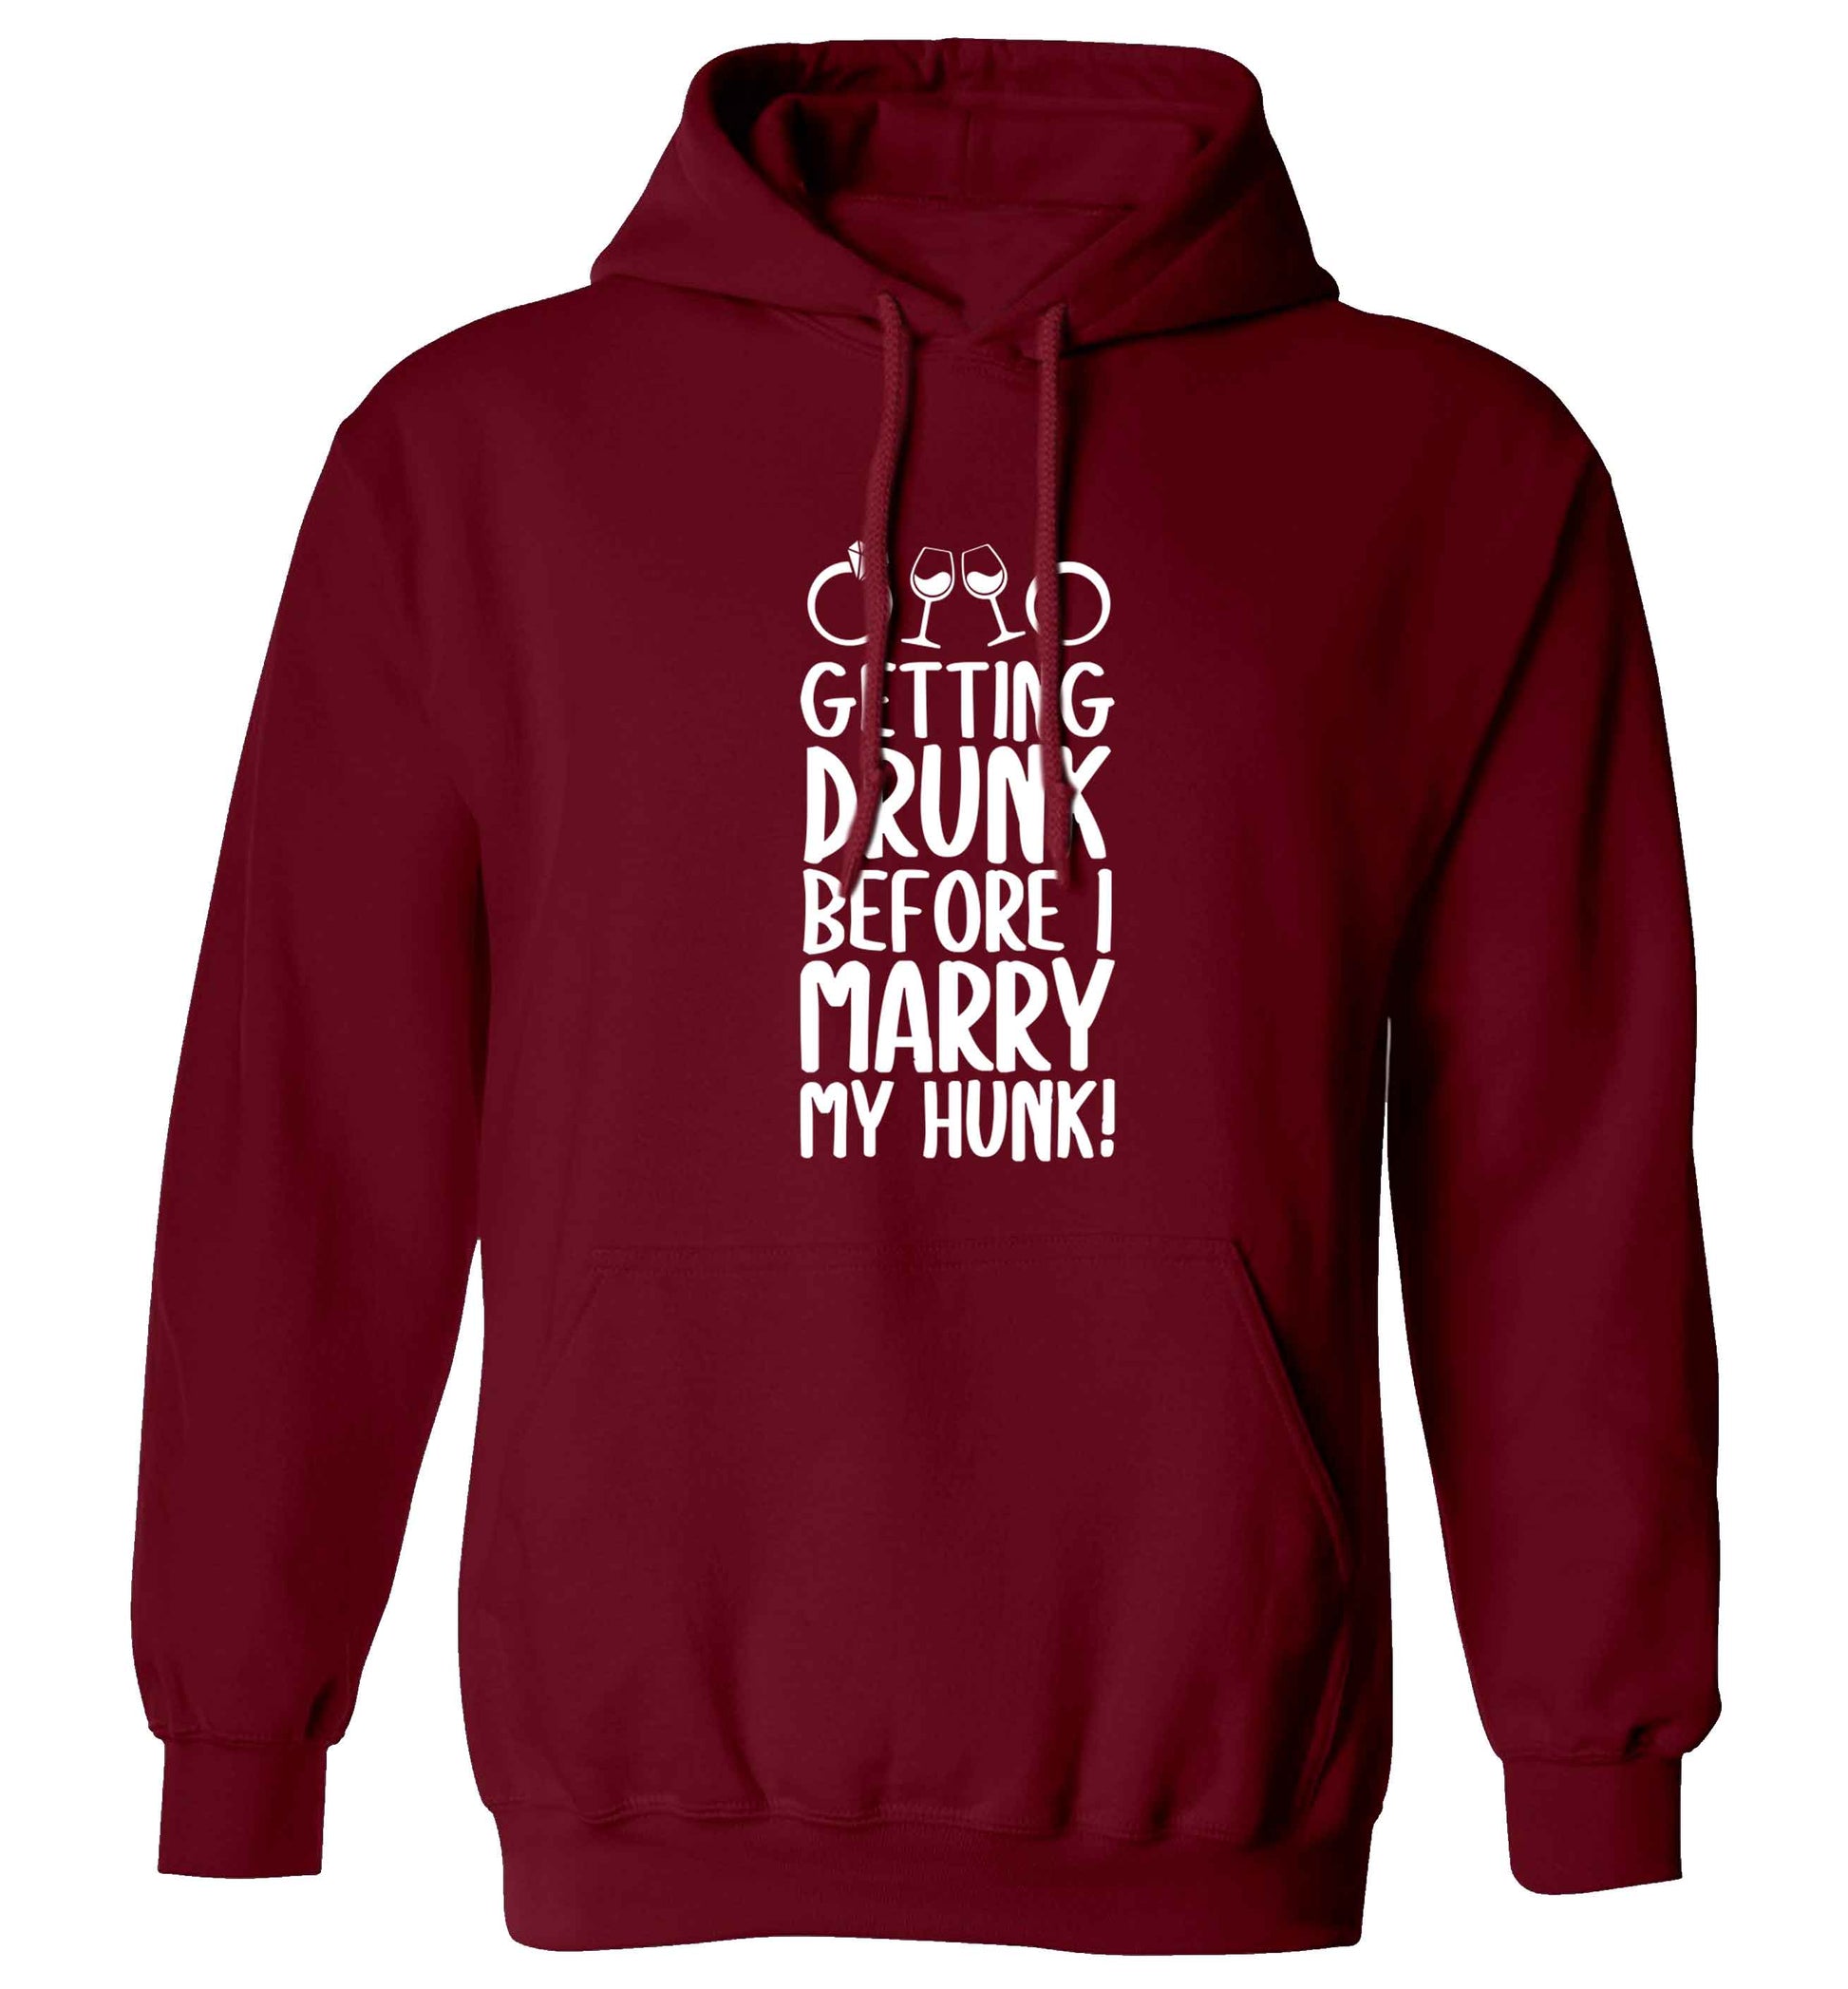 Getting drunk before I marry my hunk adults unisex maroon hoodie 2XL